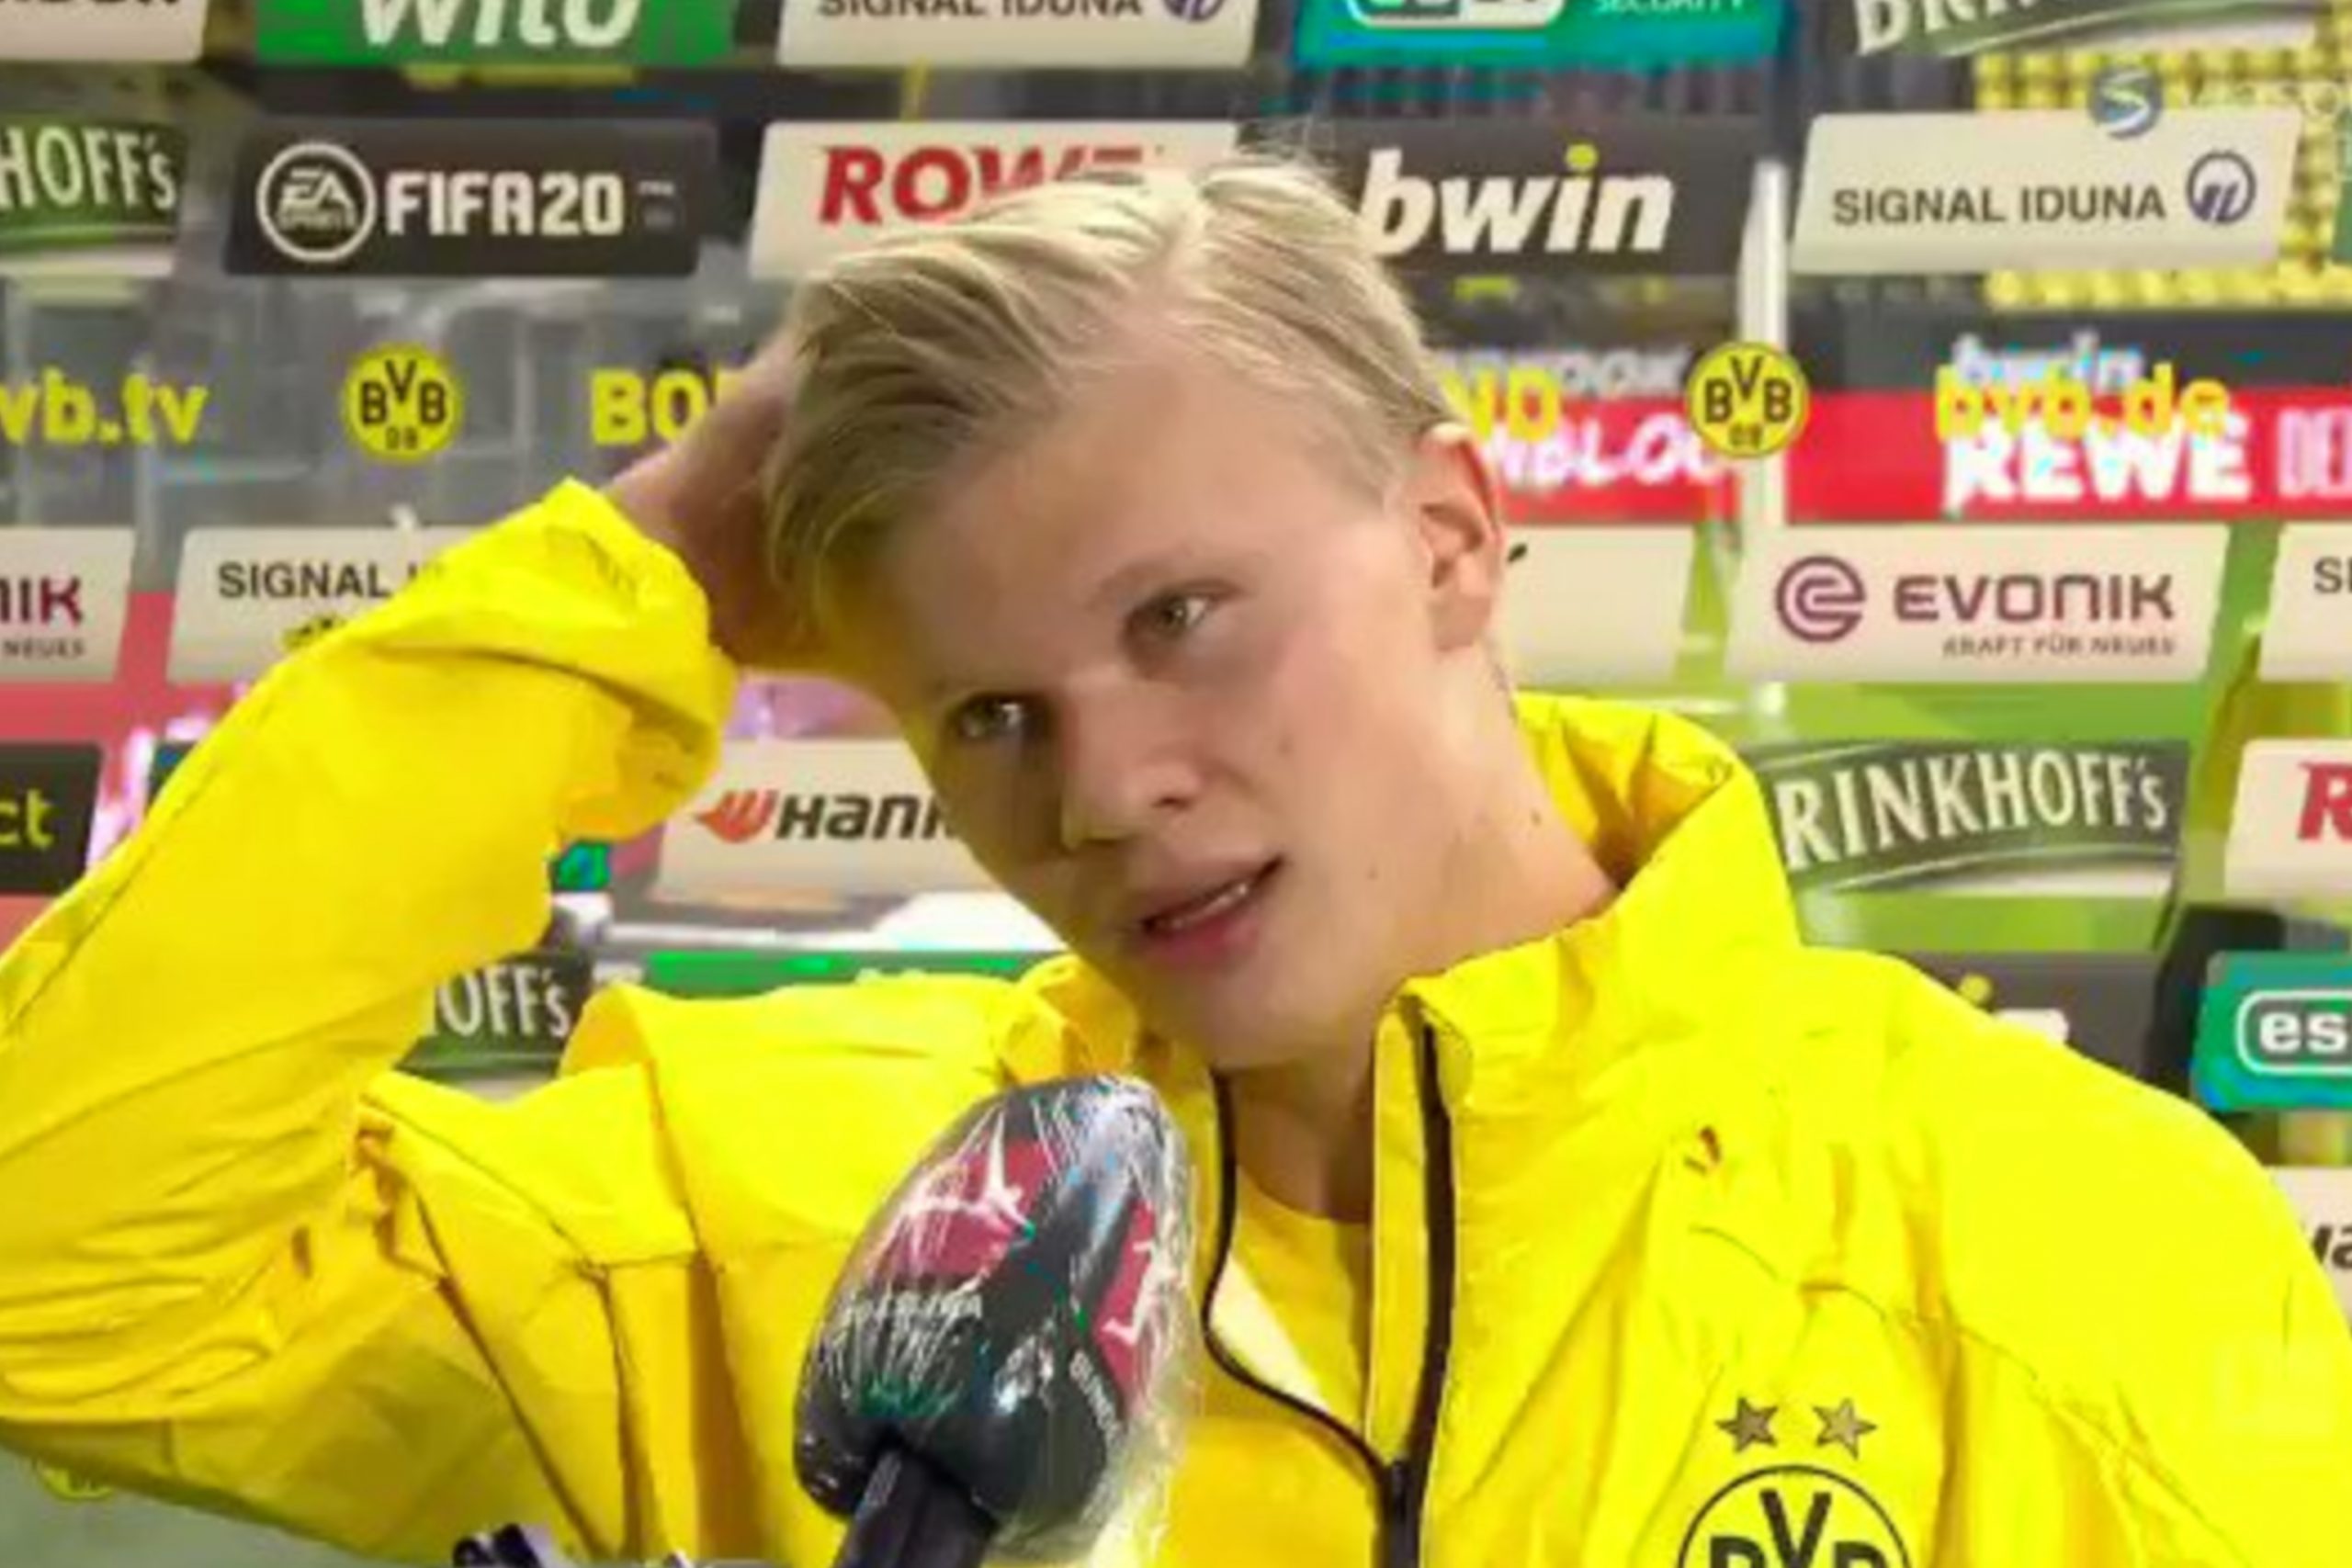 New clip shows Erling Haaland’s interview post Schalke win wasn’t as bad as it looked